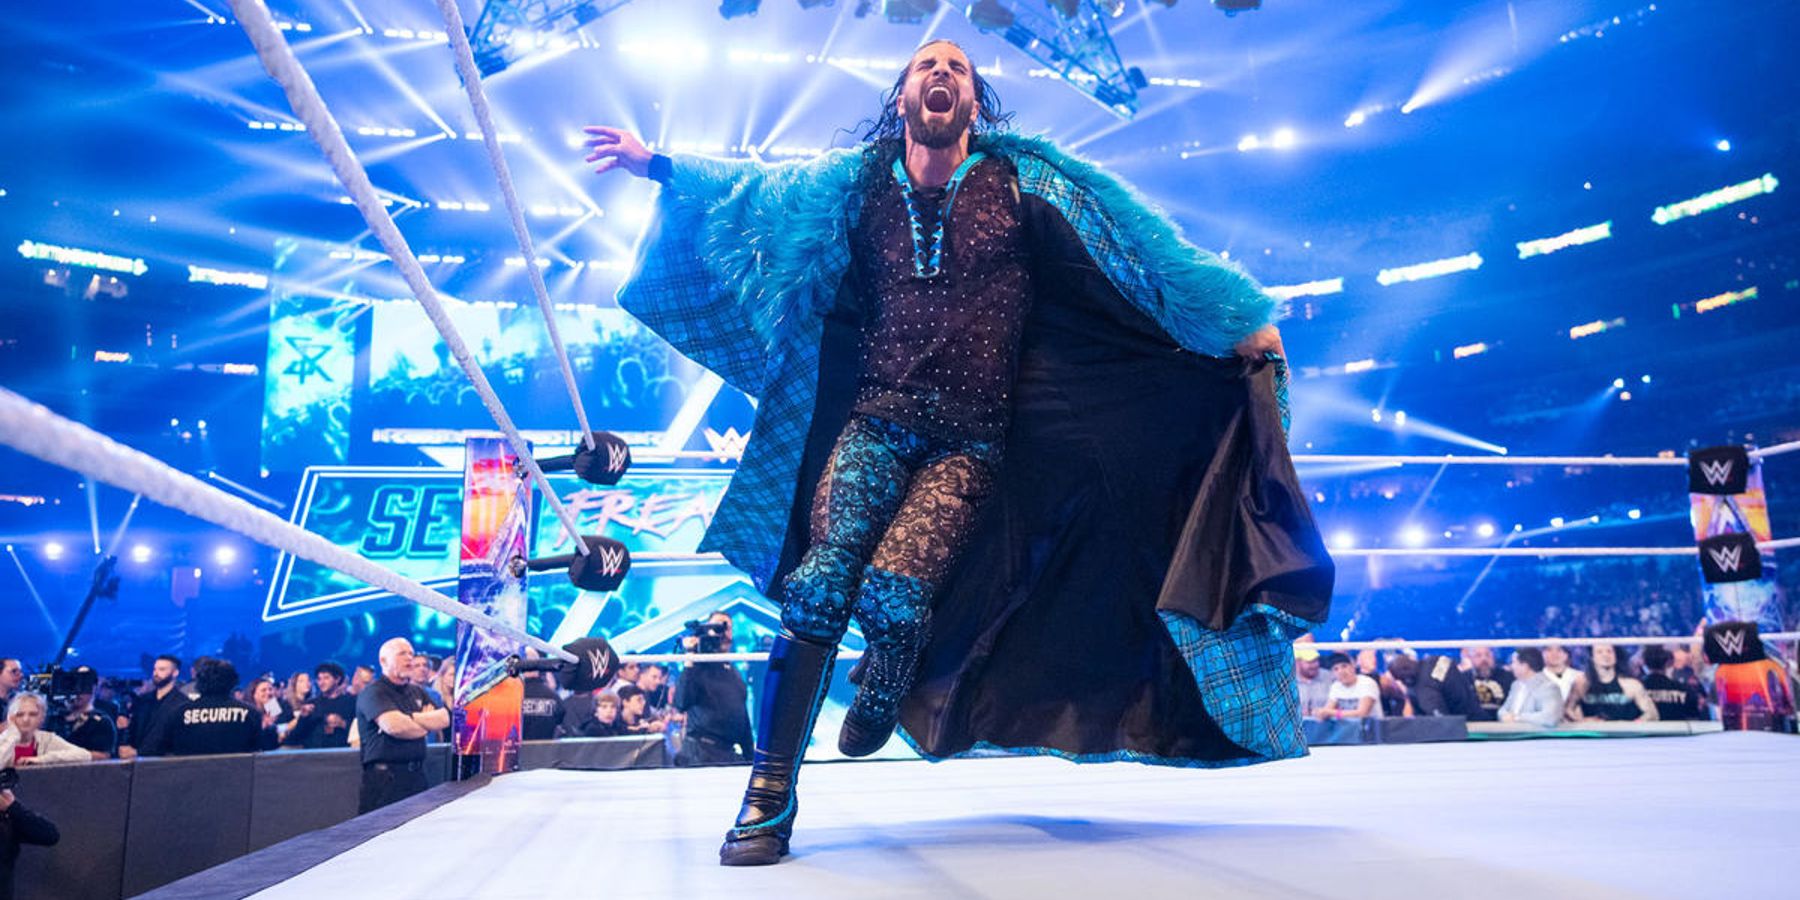 Seth Rollins makes his entrance during WWE WrestleMania 38, where he'd take on Cody Rhodes in his return match.